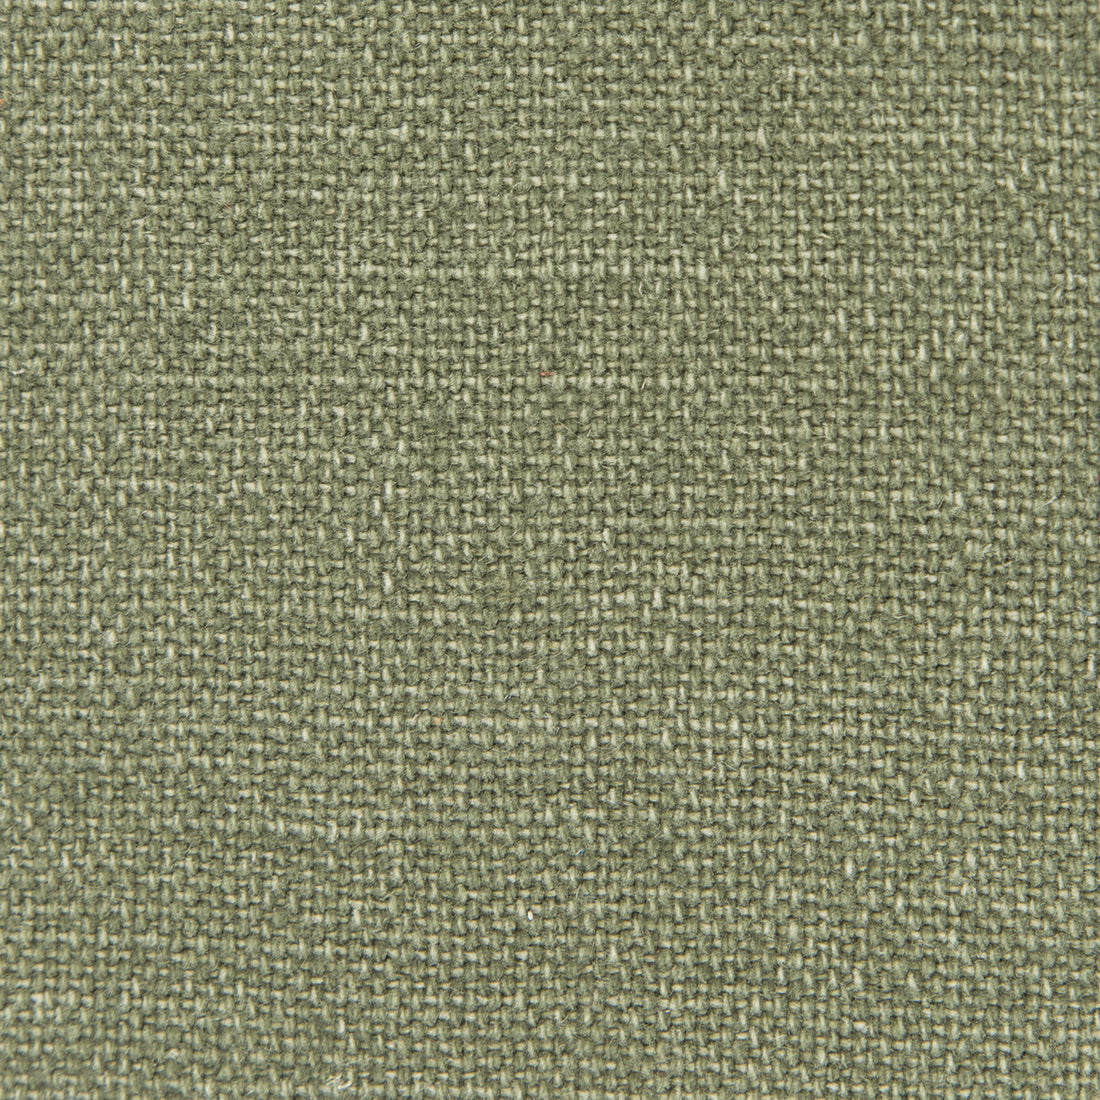 Nicaragua fabric in verde oscuro color - pattern GDT5239.012.0 - by Gaston y Daniela in the Basics collection